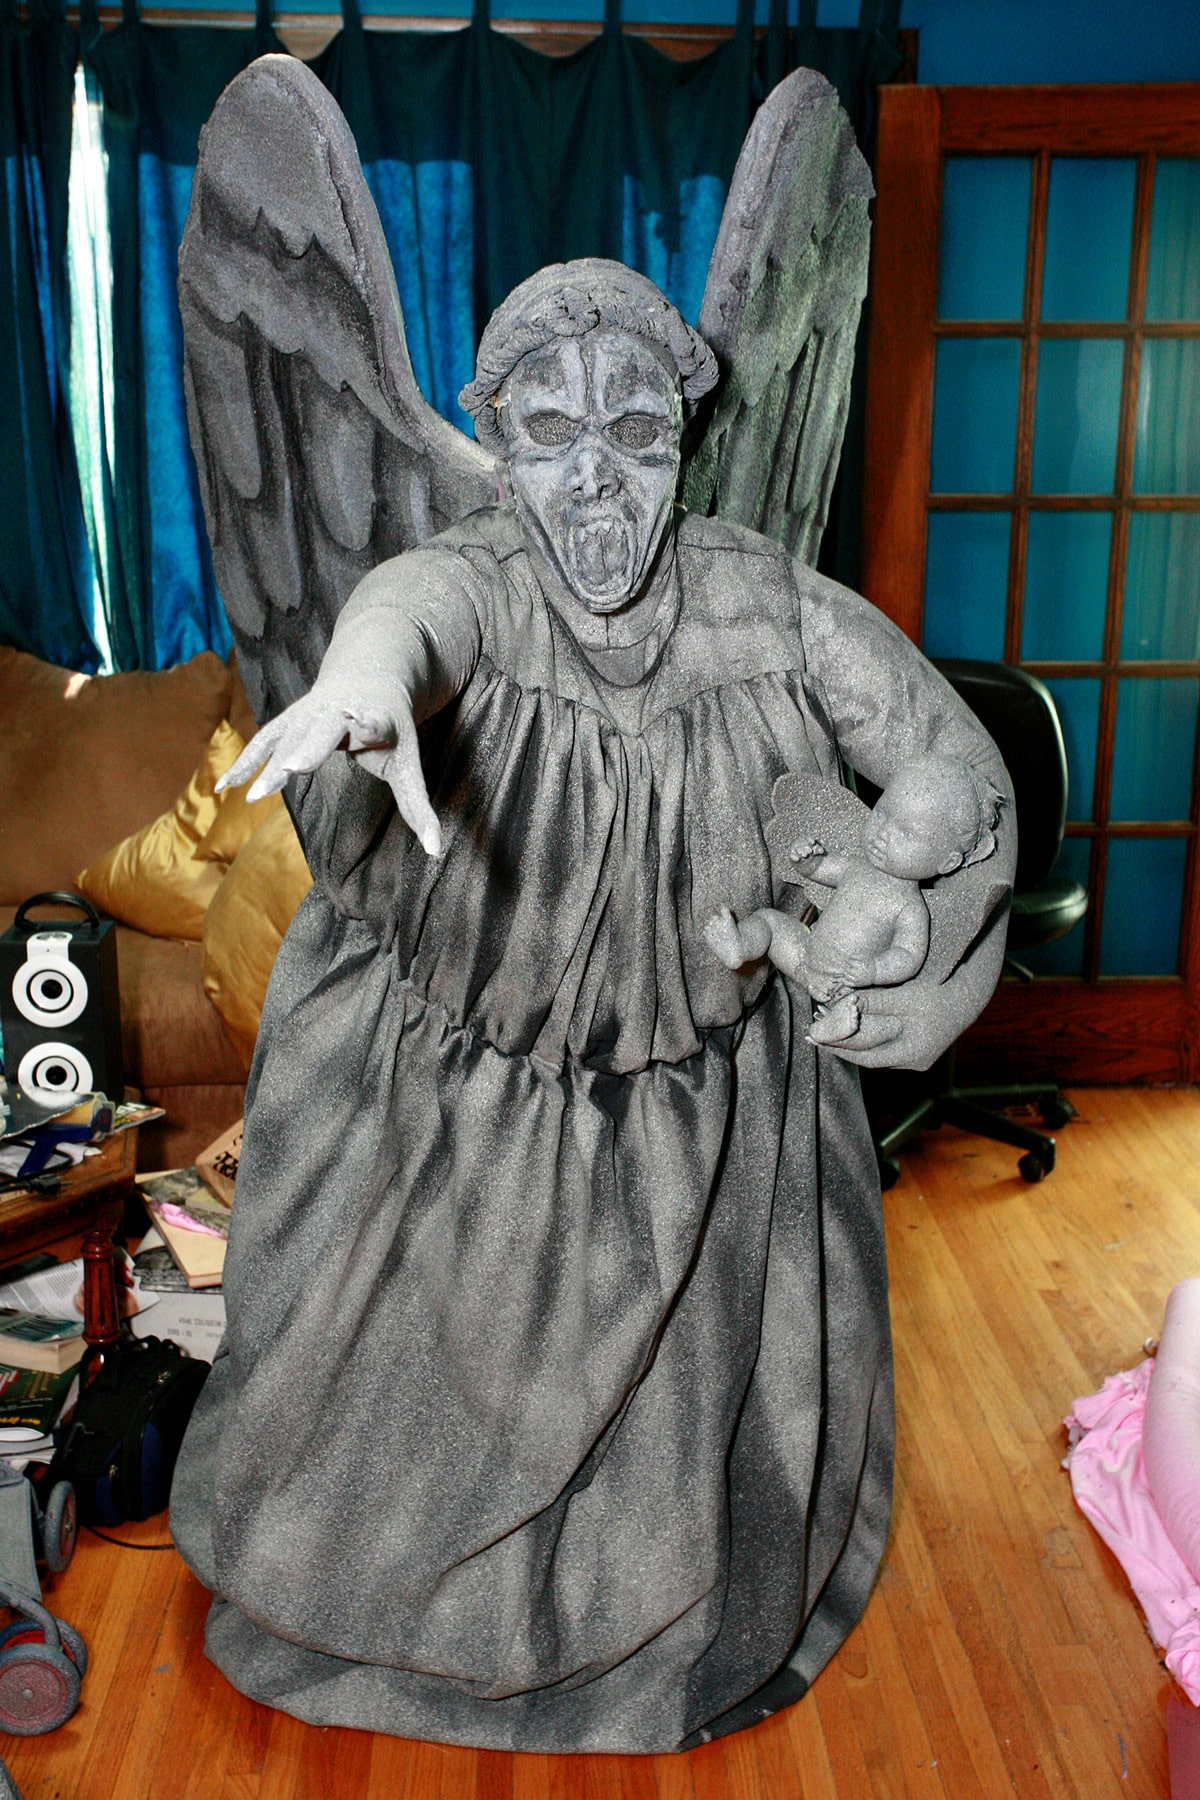 A person dressed as a weeping angel statue, holding a baby weeping angel doll.